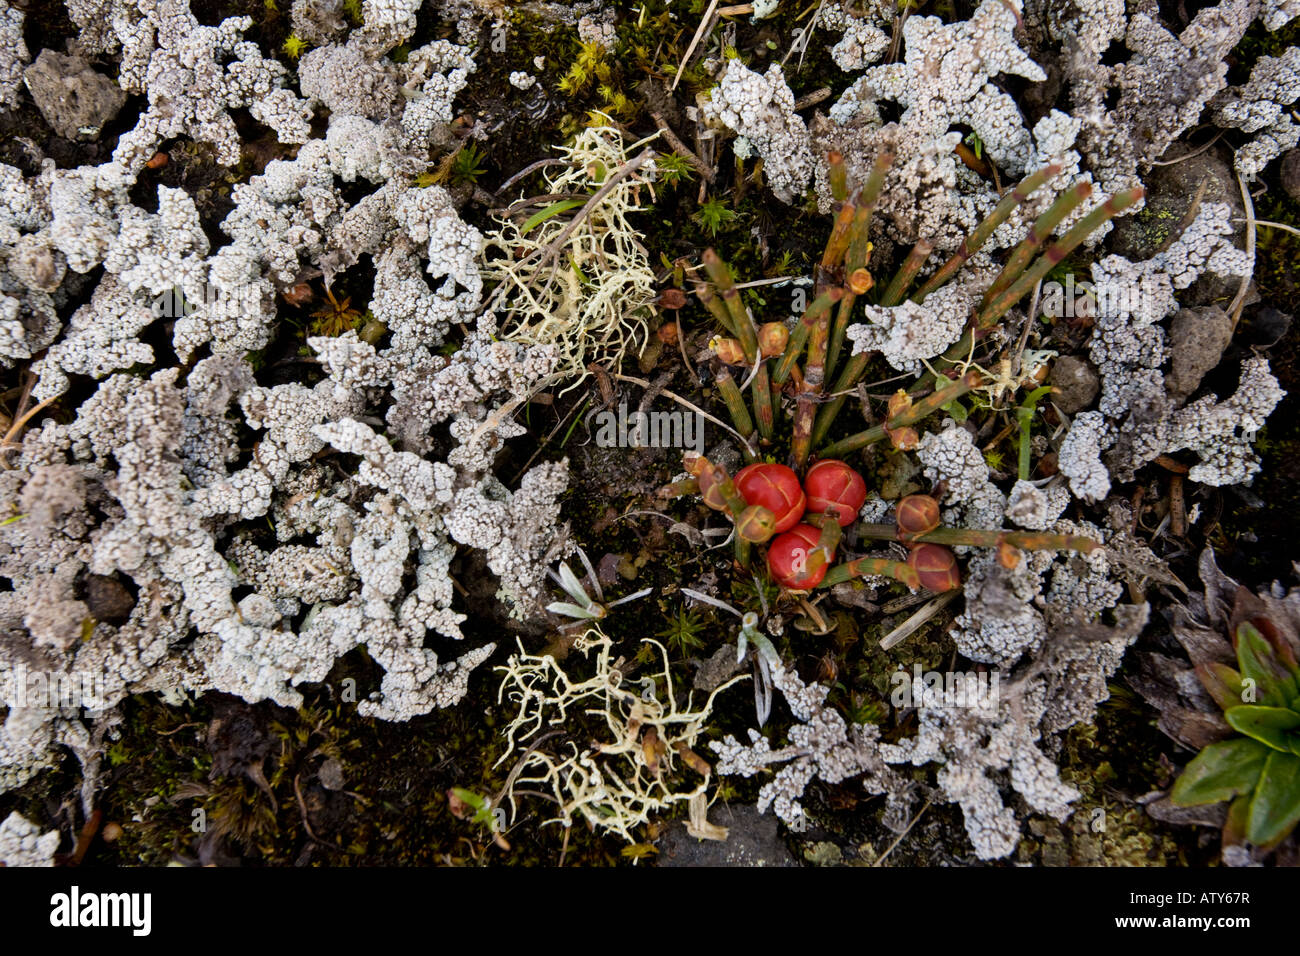 A joint pine Ephedra americana in fruit dwarfed amongst lichens at high altitude on Cotopaxi Ecuador Stock Photo